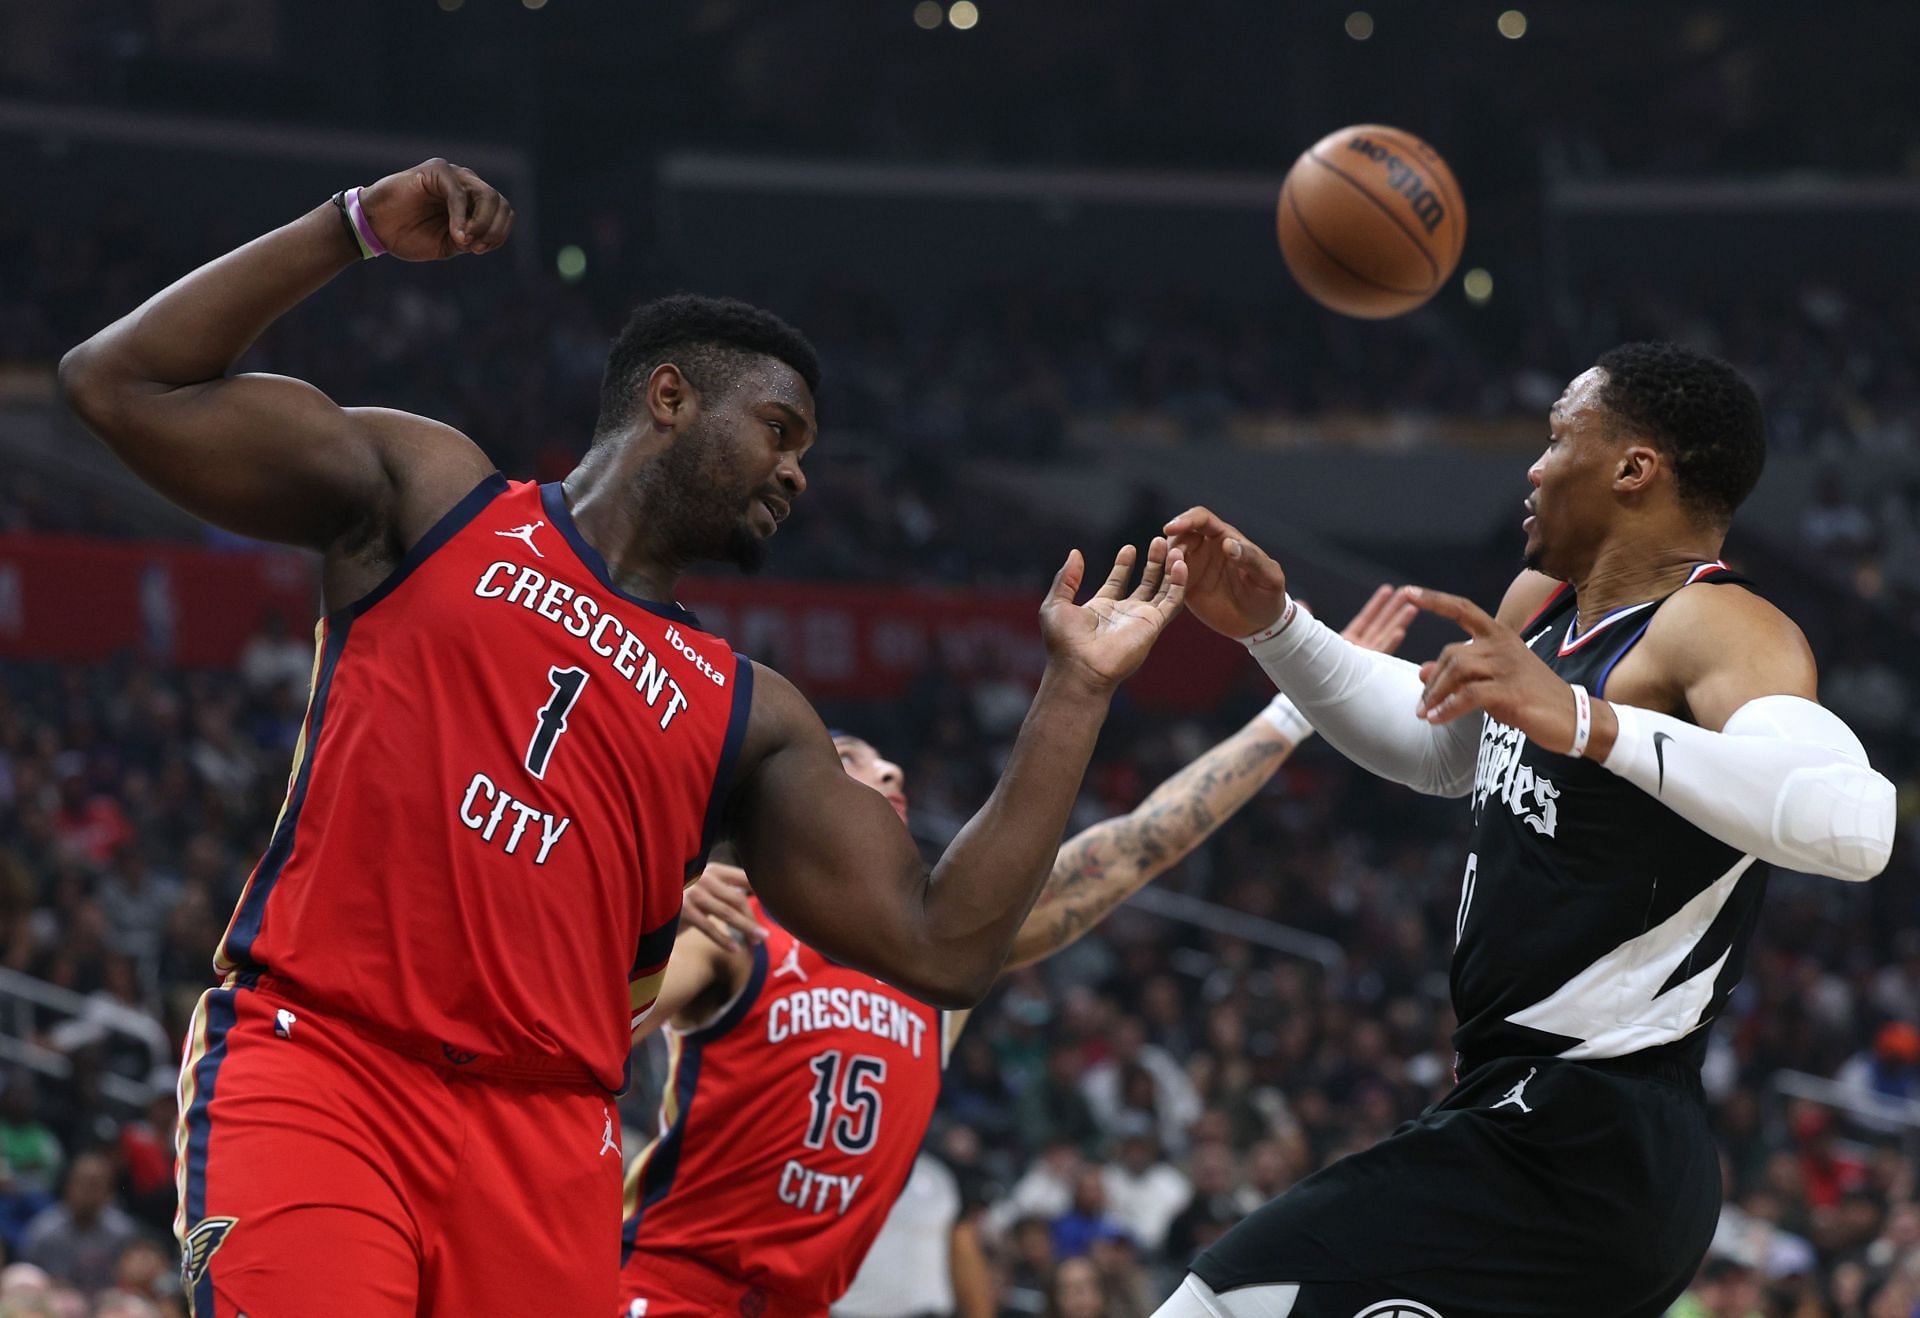 New Orleans Pelicans v Los Angeles Clippers